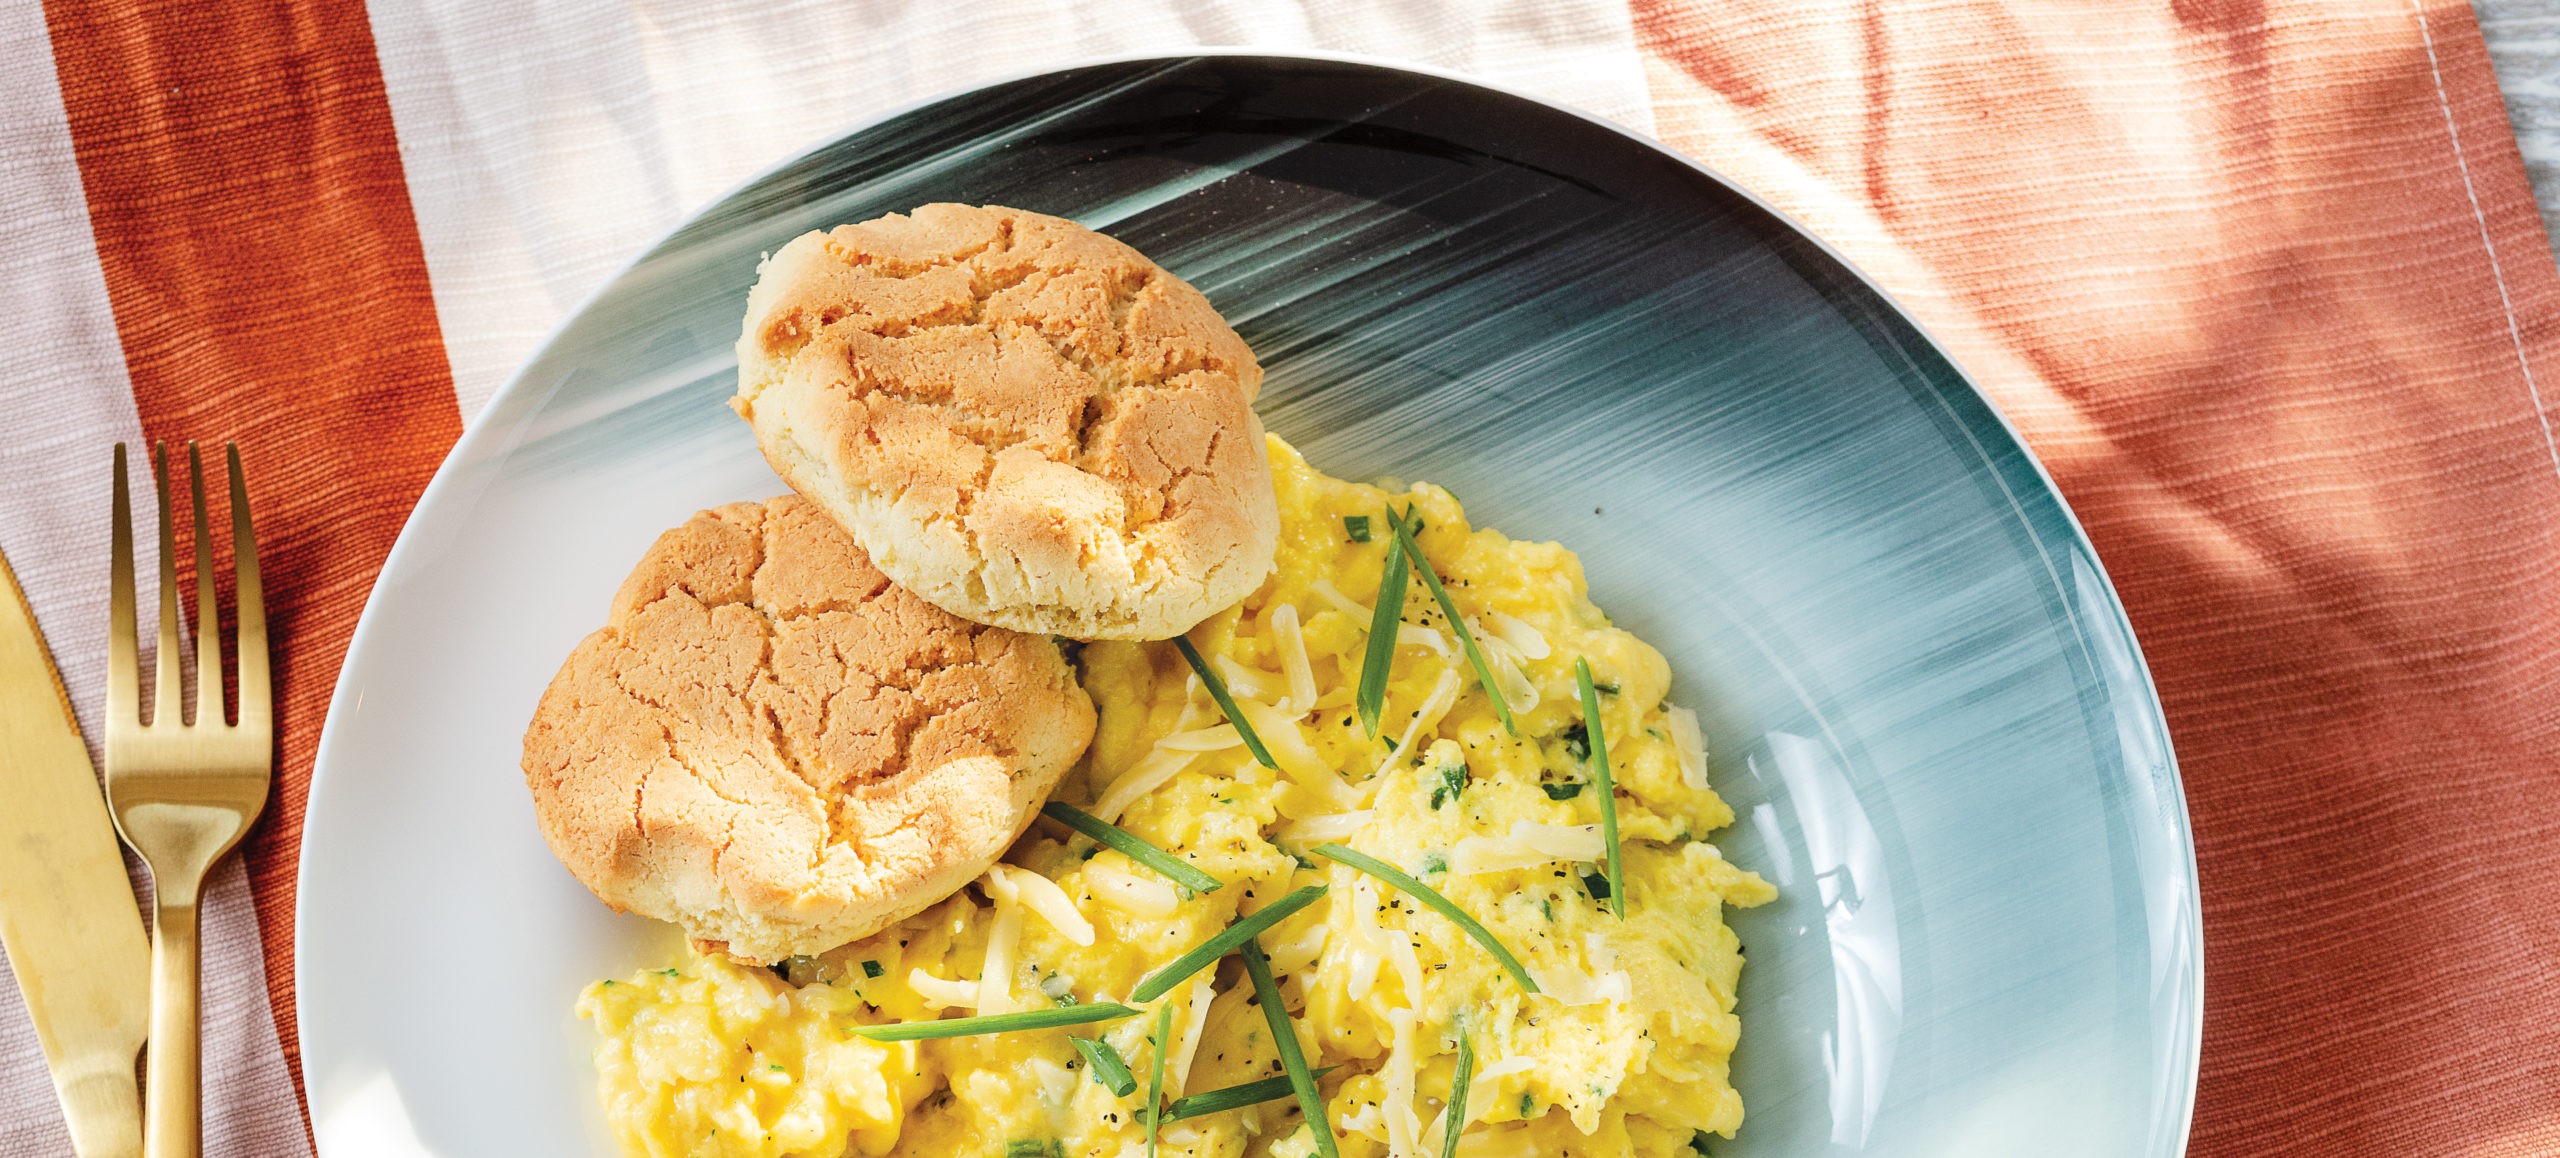 Keto Scrambled Eggs with Easy Almond-Flour Biscuits